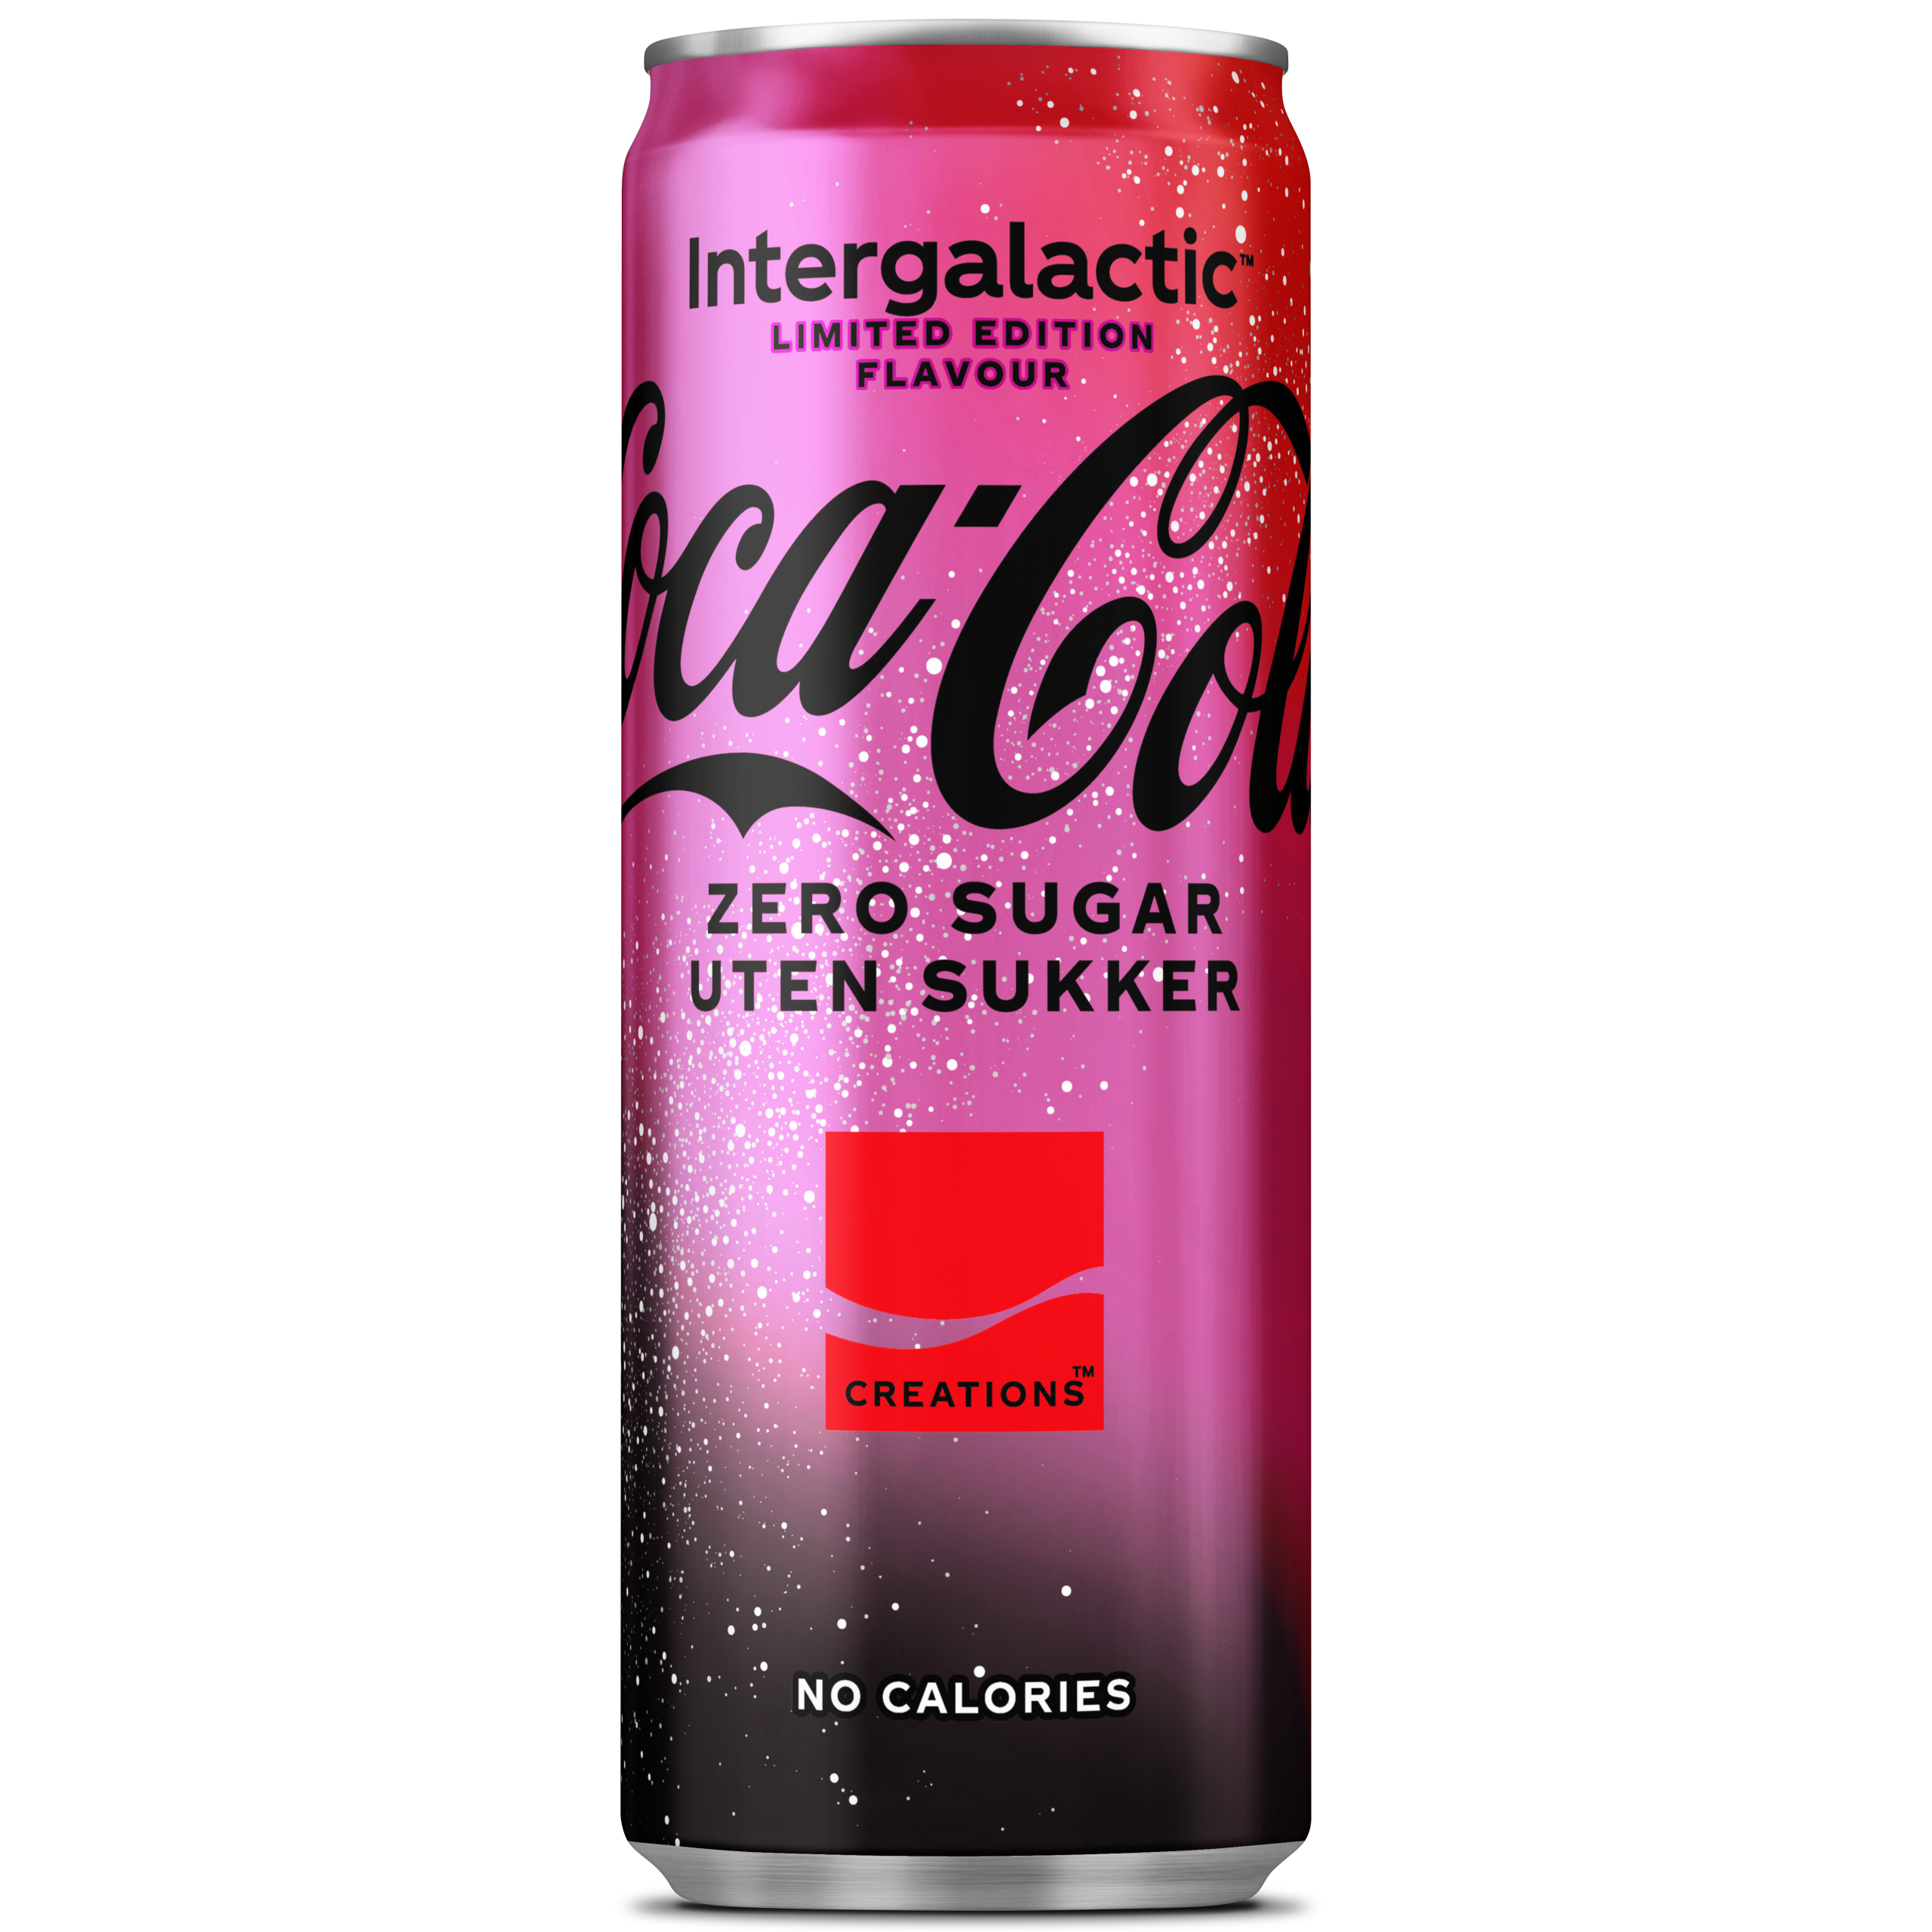 Coca-Cola announces ‘out of this world’ limited-edition Intergalactic